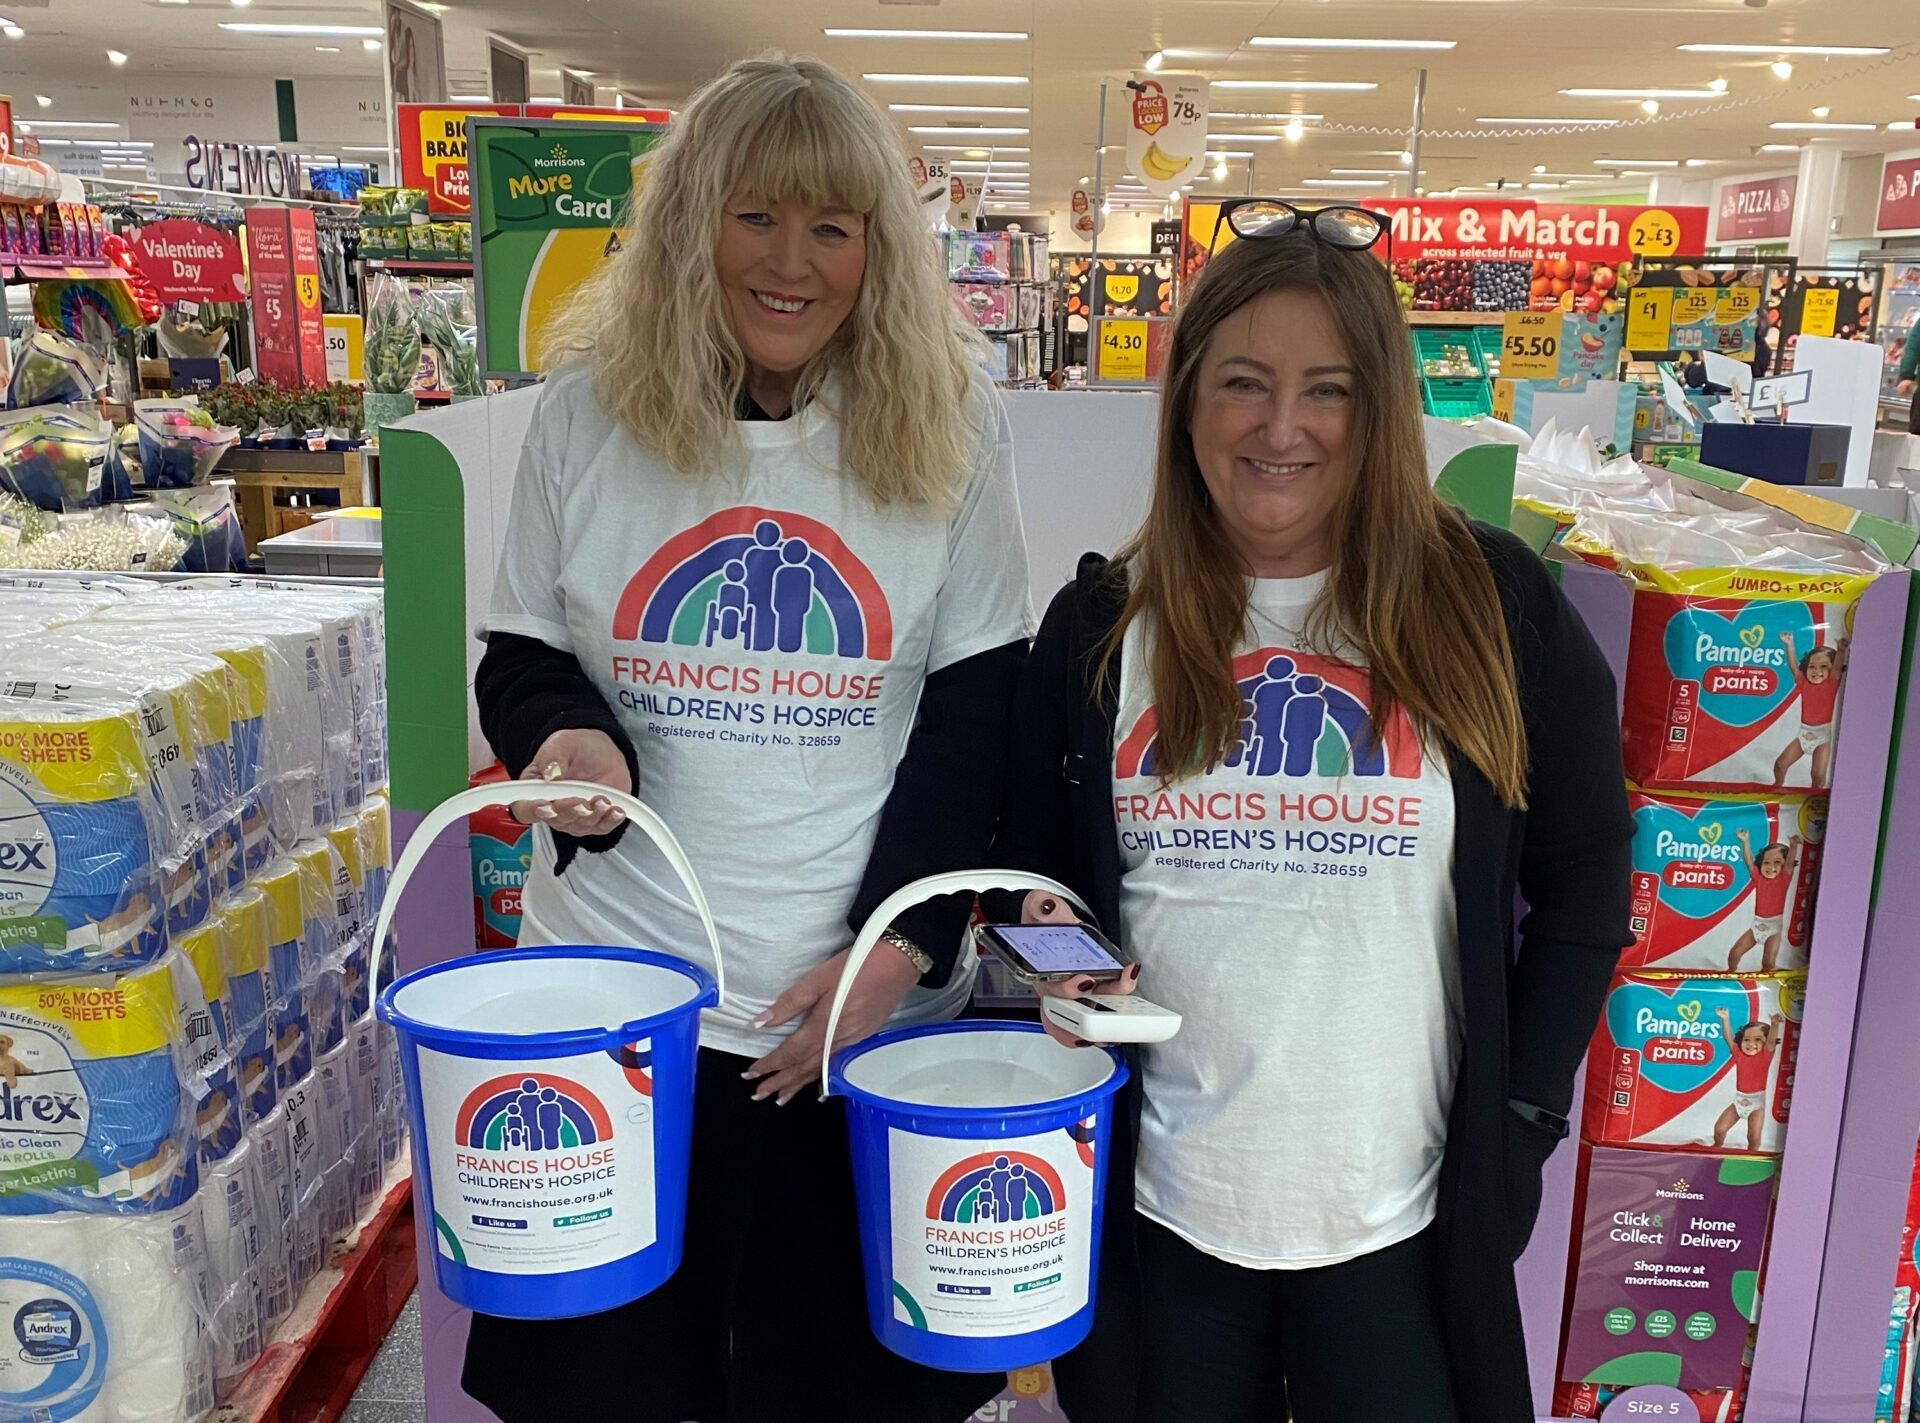 Two women wearing white t-shirts with a rainbow logo stood in a supermarket holding charity collection buckets